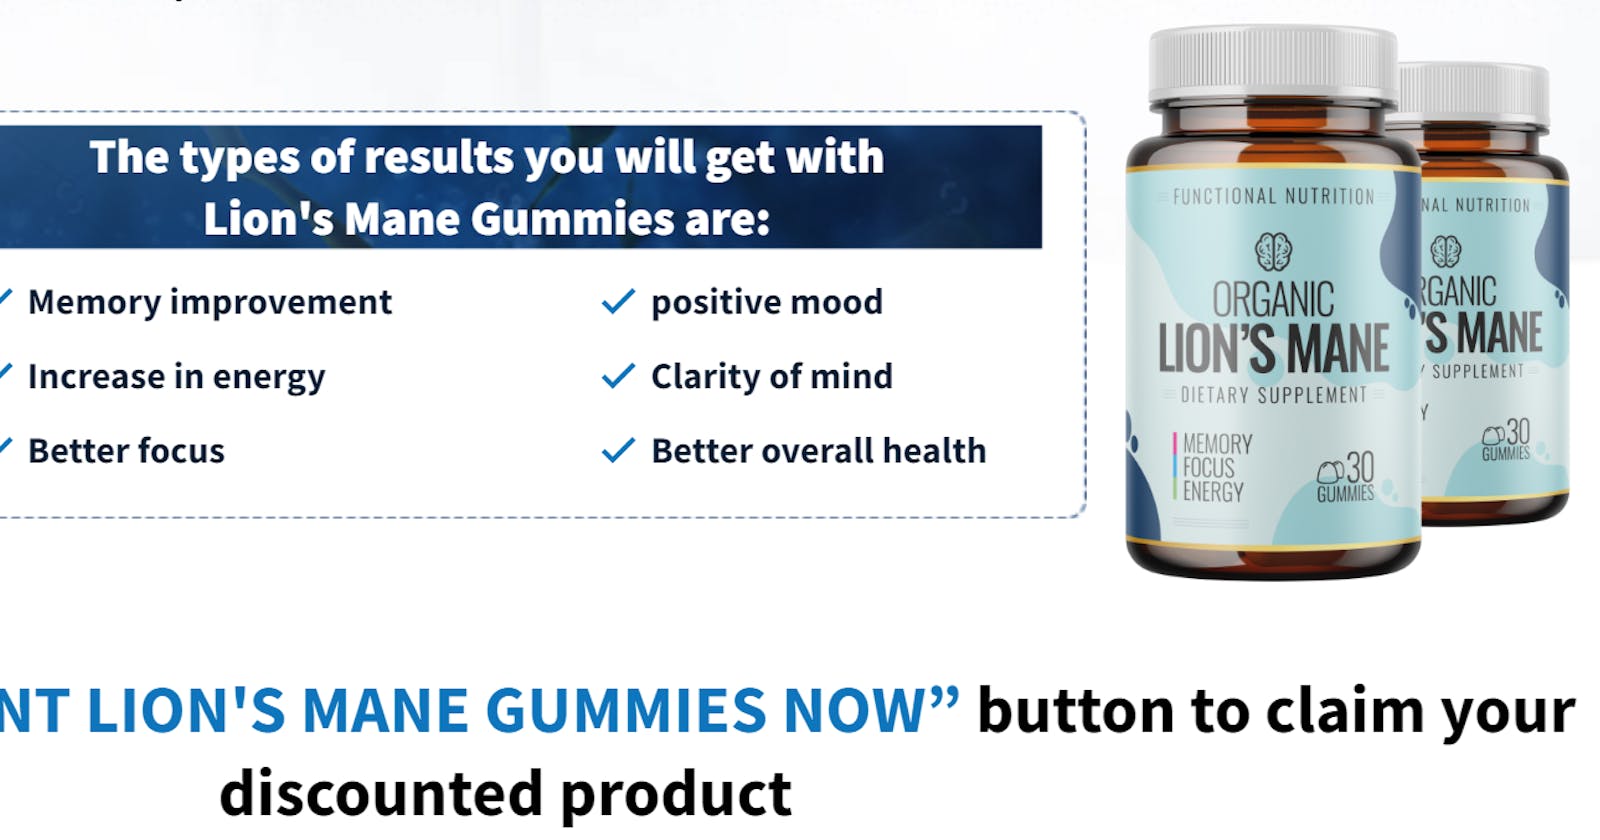 Functional Nutrition Organic Lion's Mane Ca – One Solution For Increasing Brain Power!